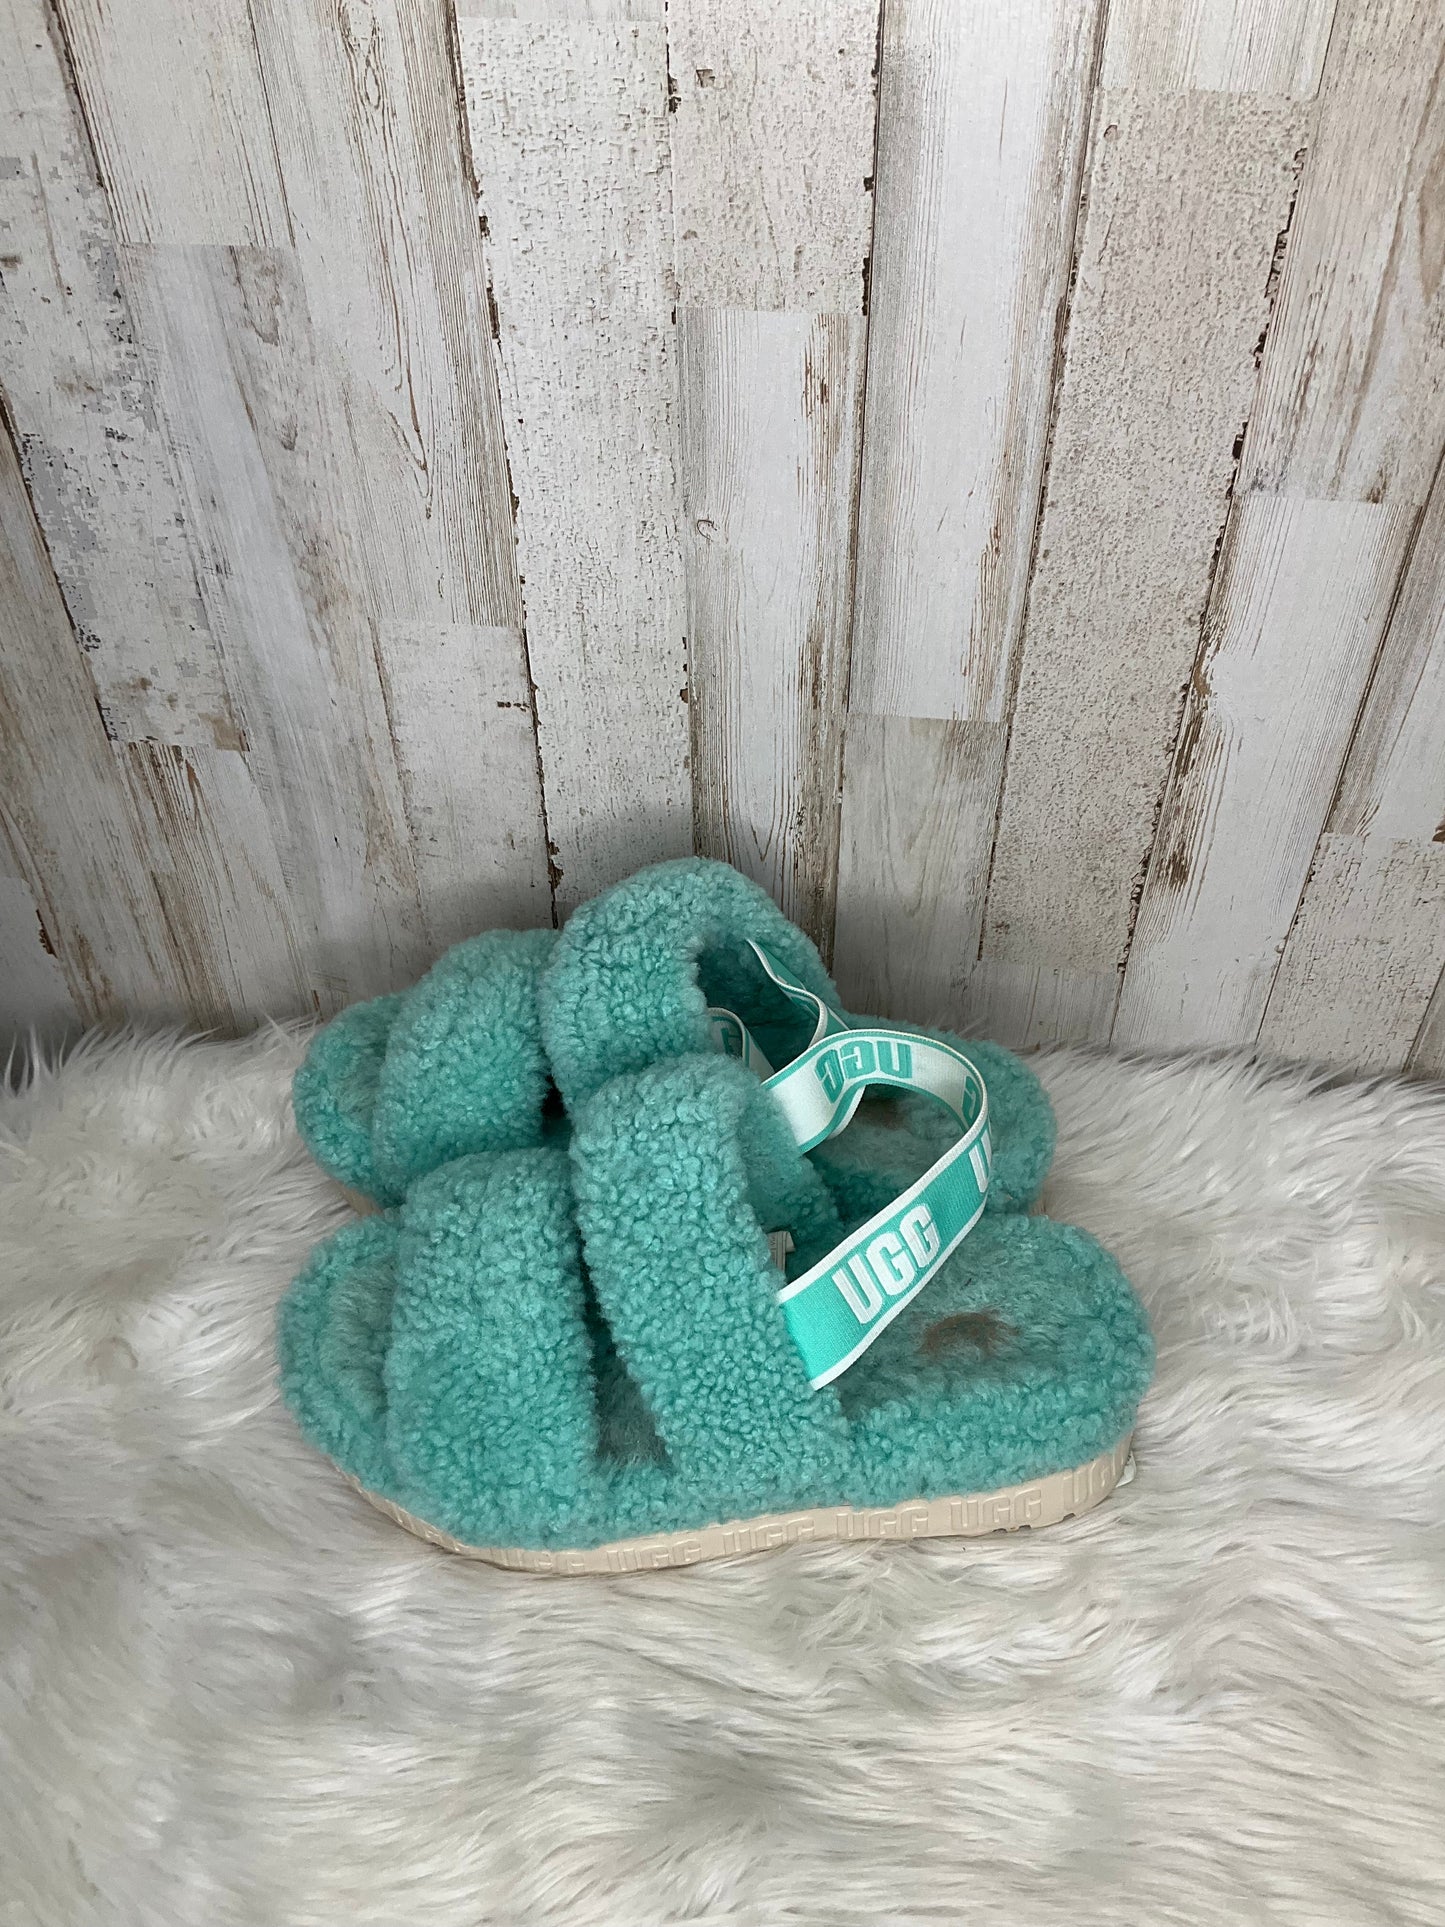 Teal Shoes Flats Ugg, Size 8